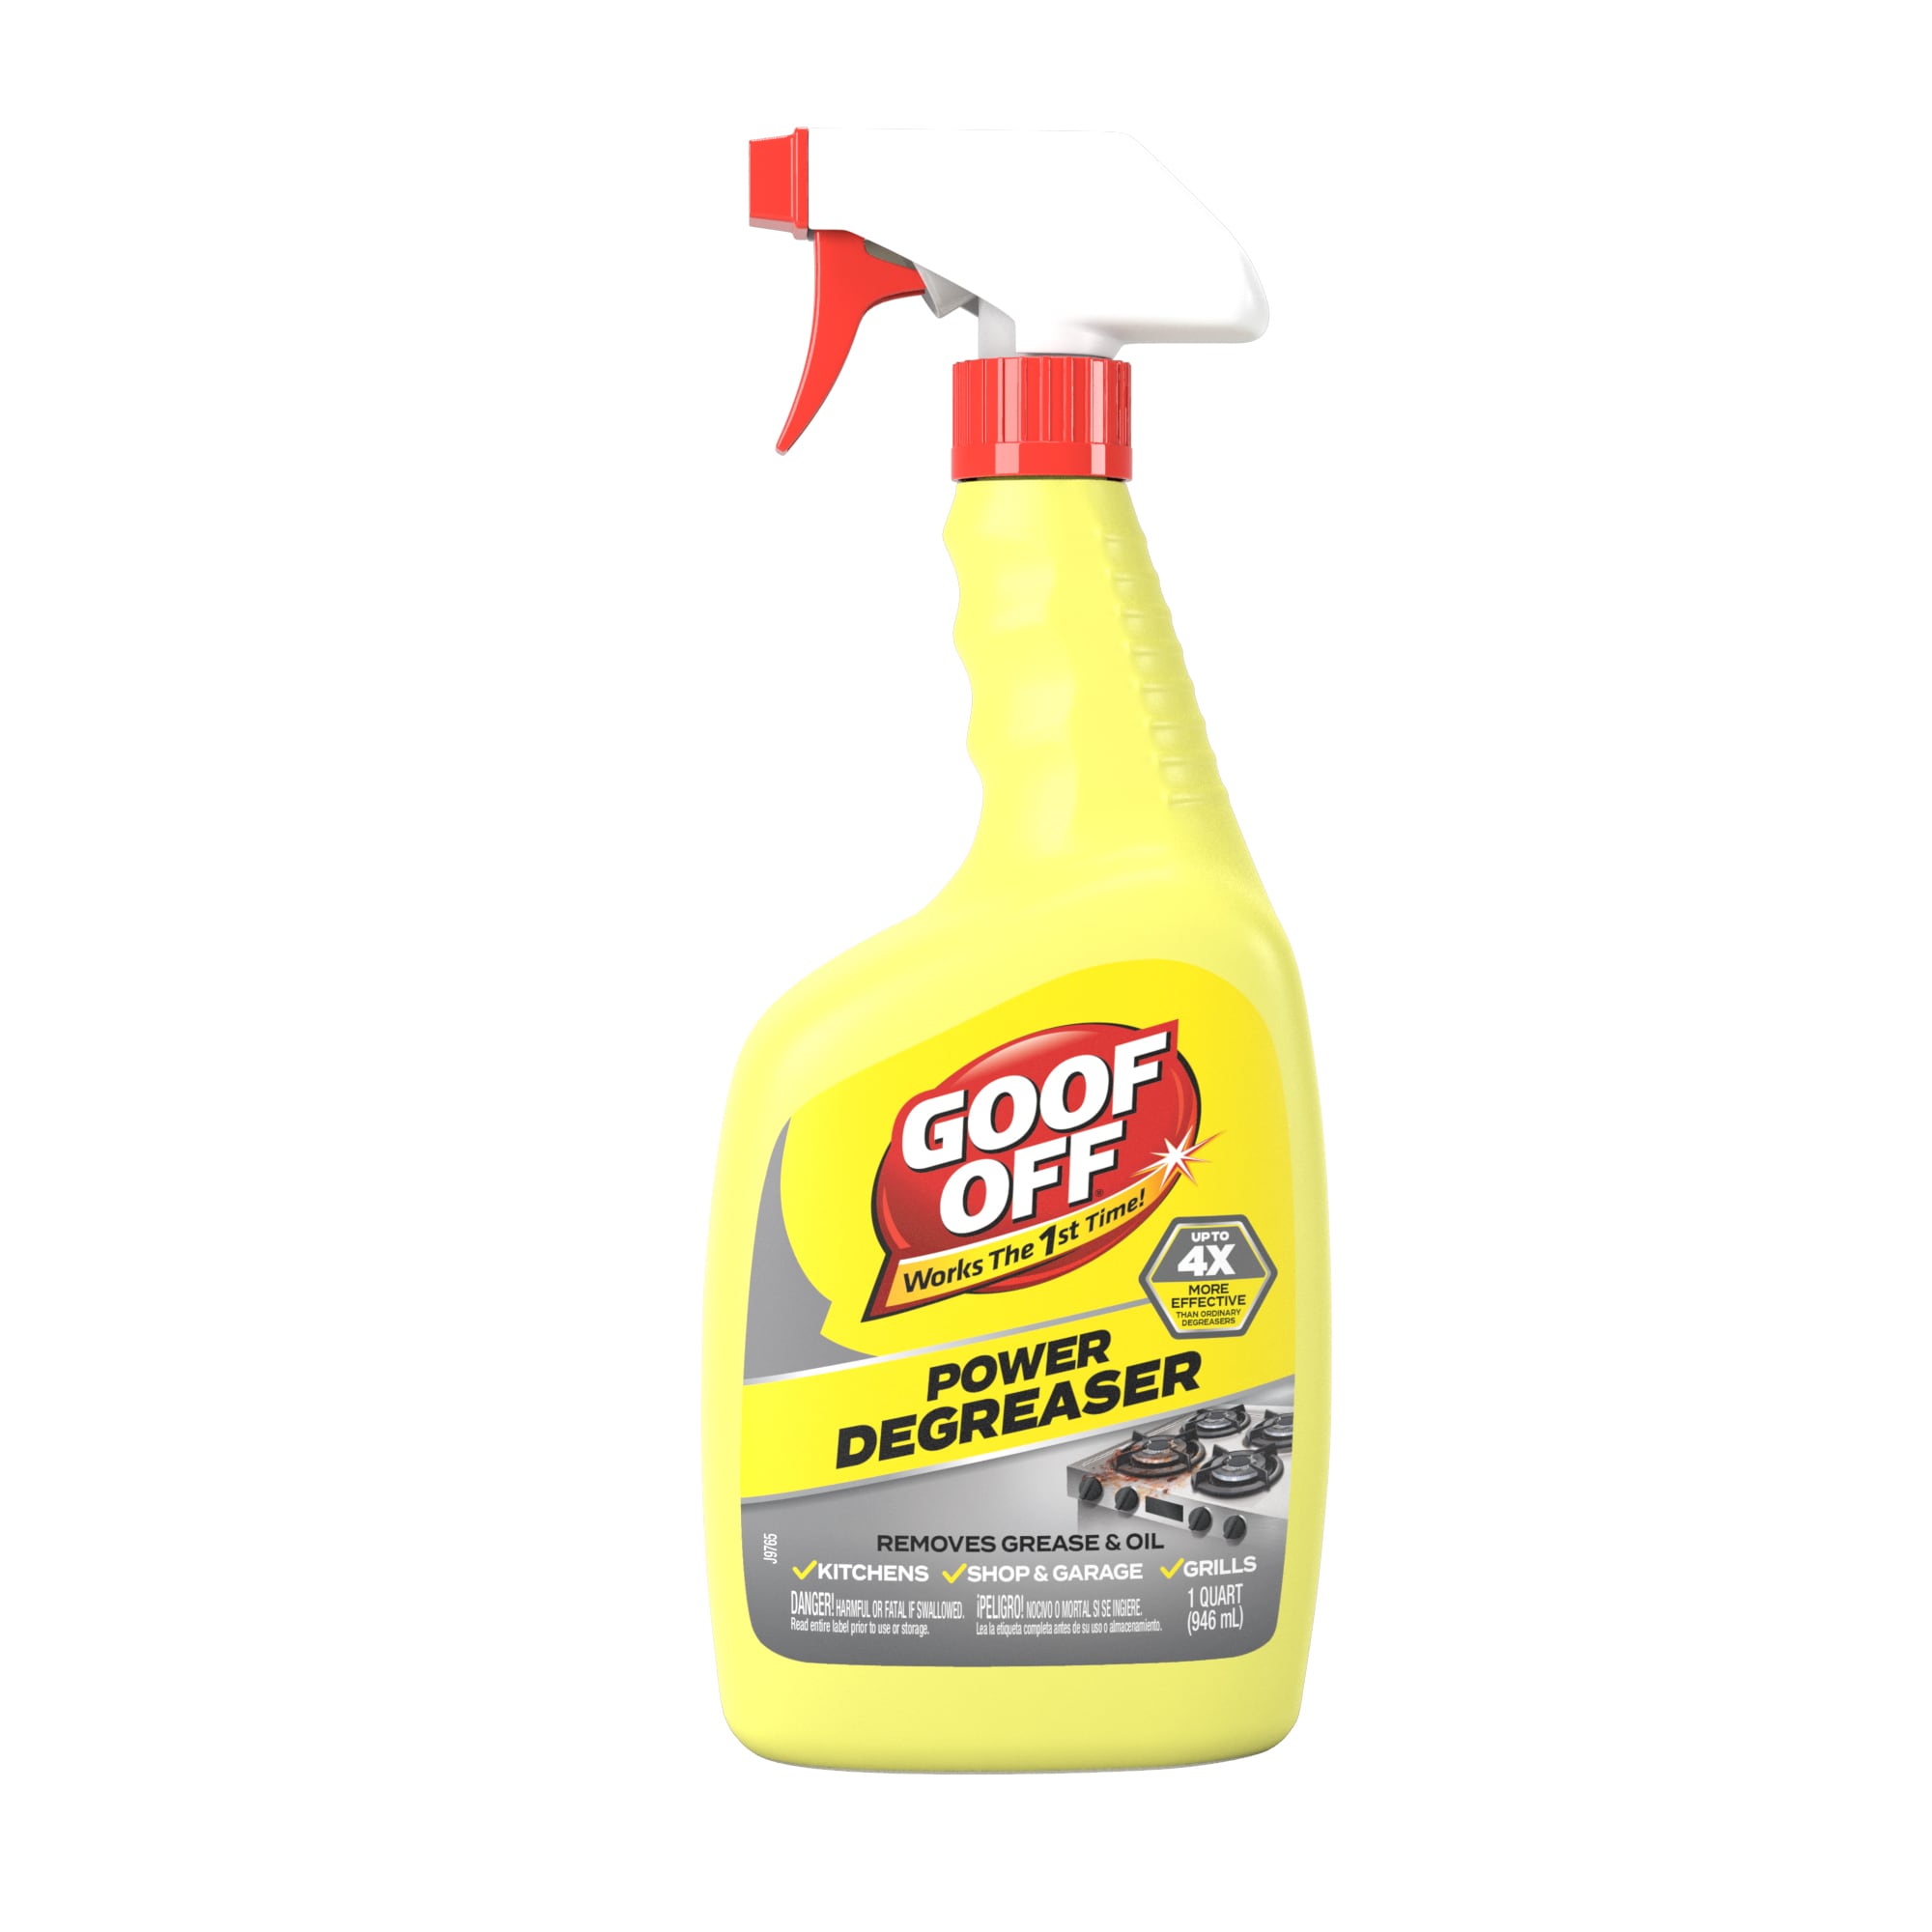 Car Glass Oil Film Cleaner Review 2022 - Does It Work? 